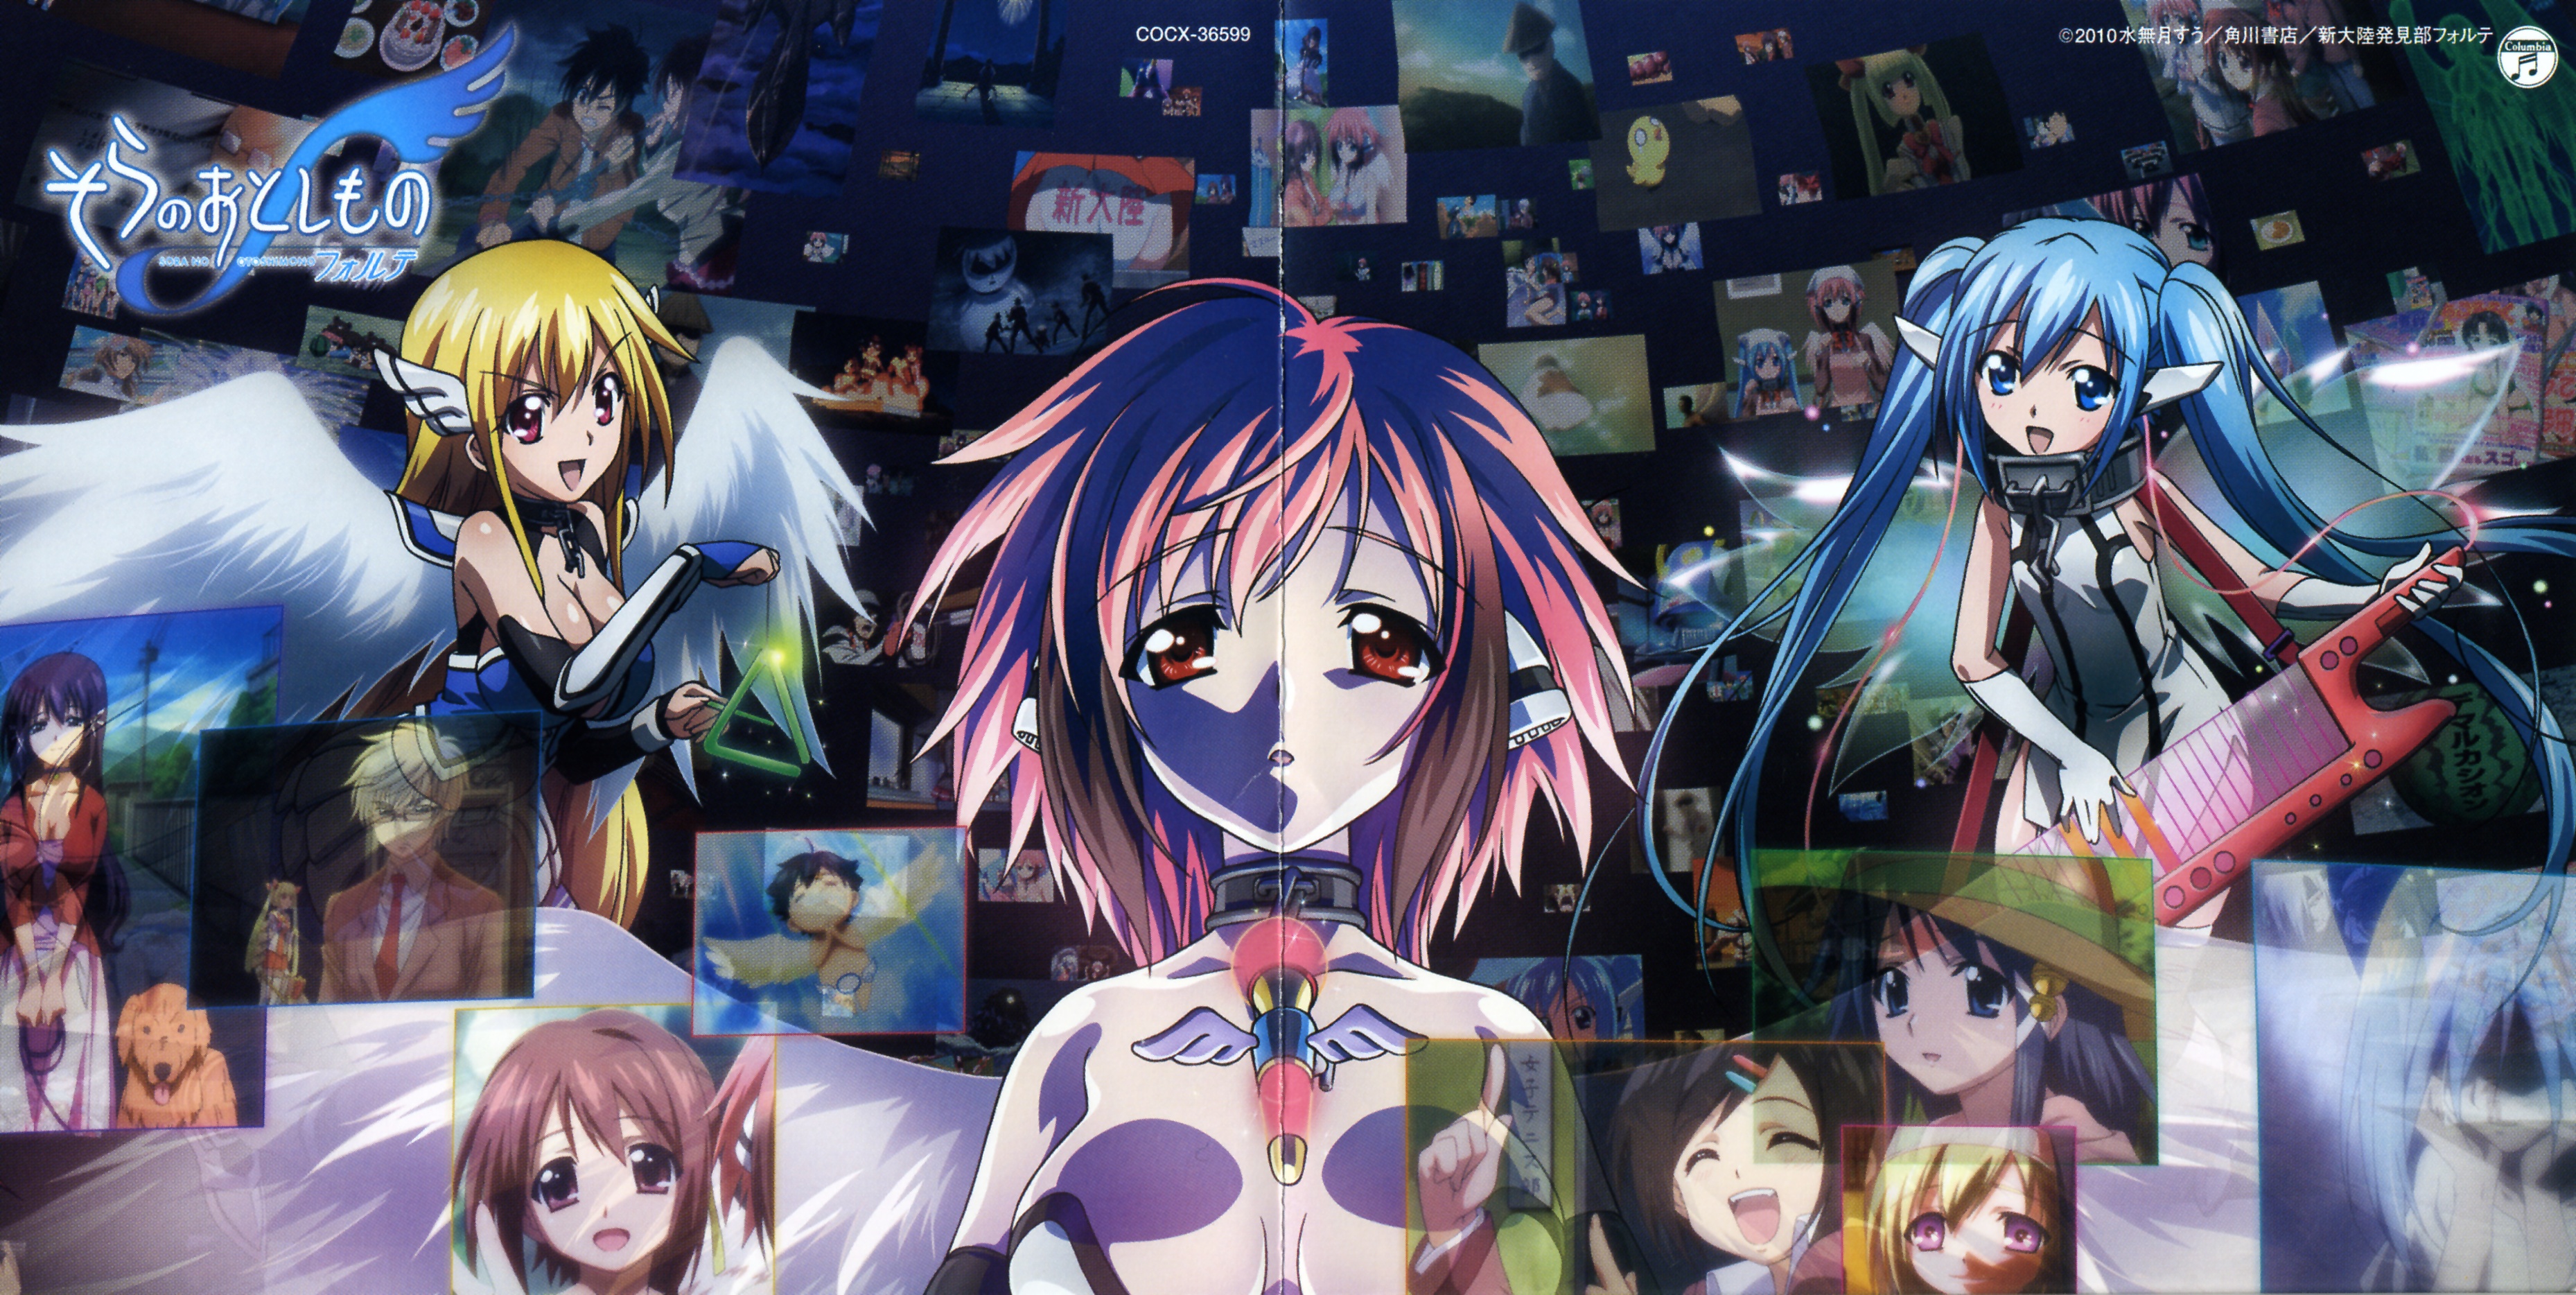 Heaven'S Lost Property Wallpapers